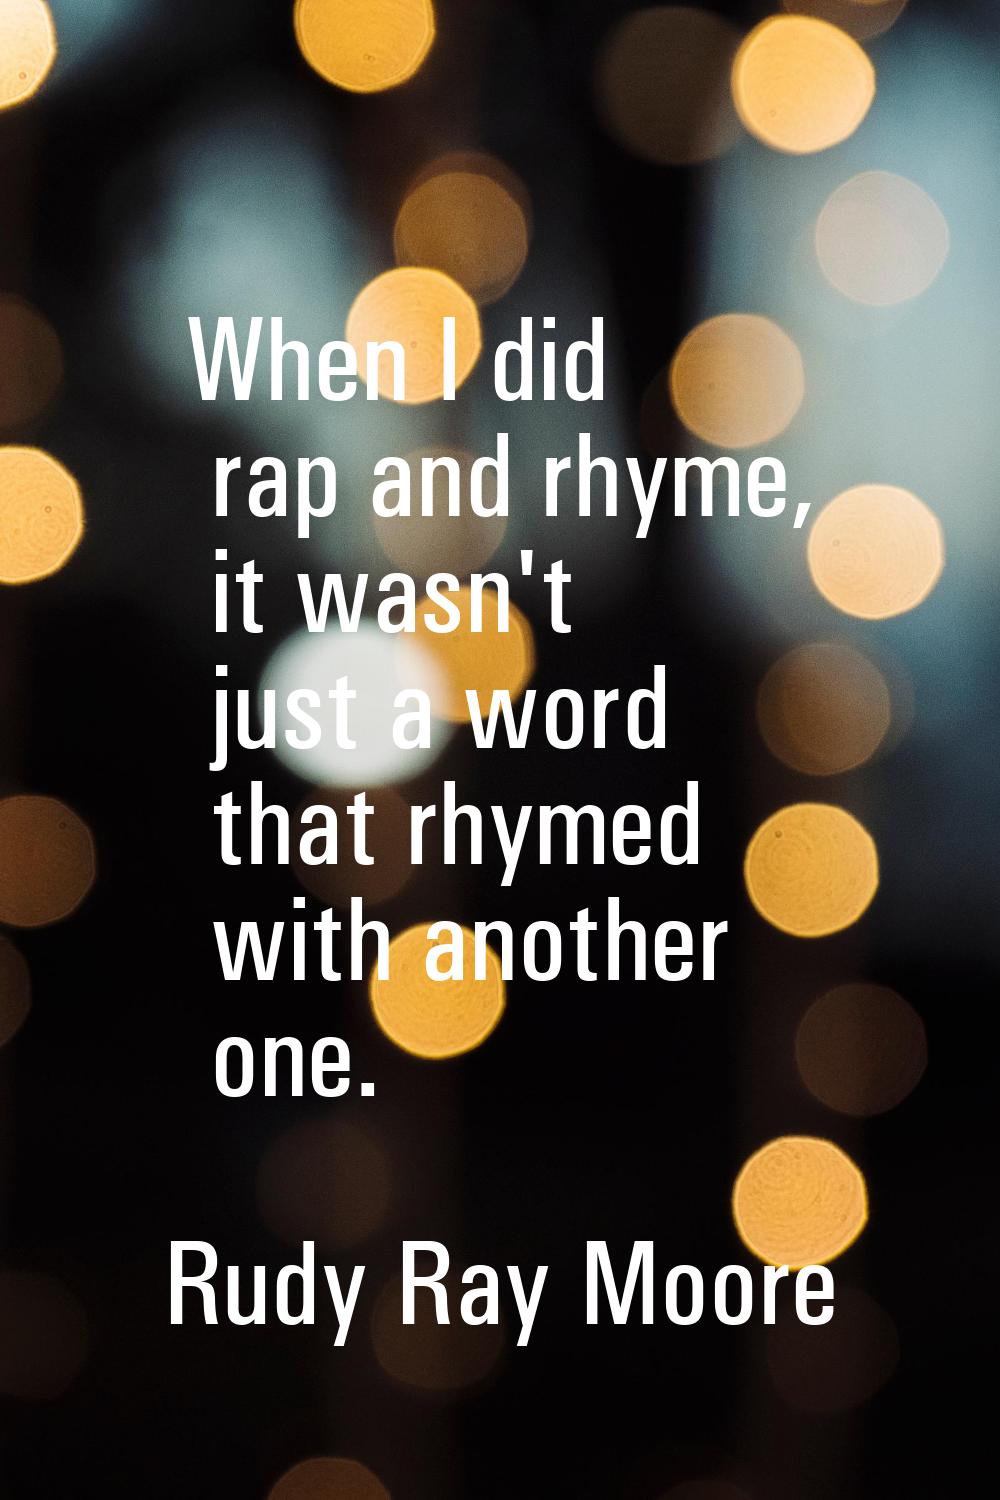 When I did rap and rhyme, it wasn't just a word that rhymed with another one.